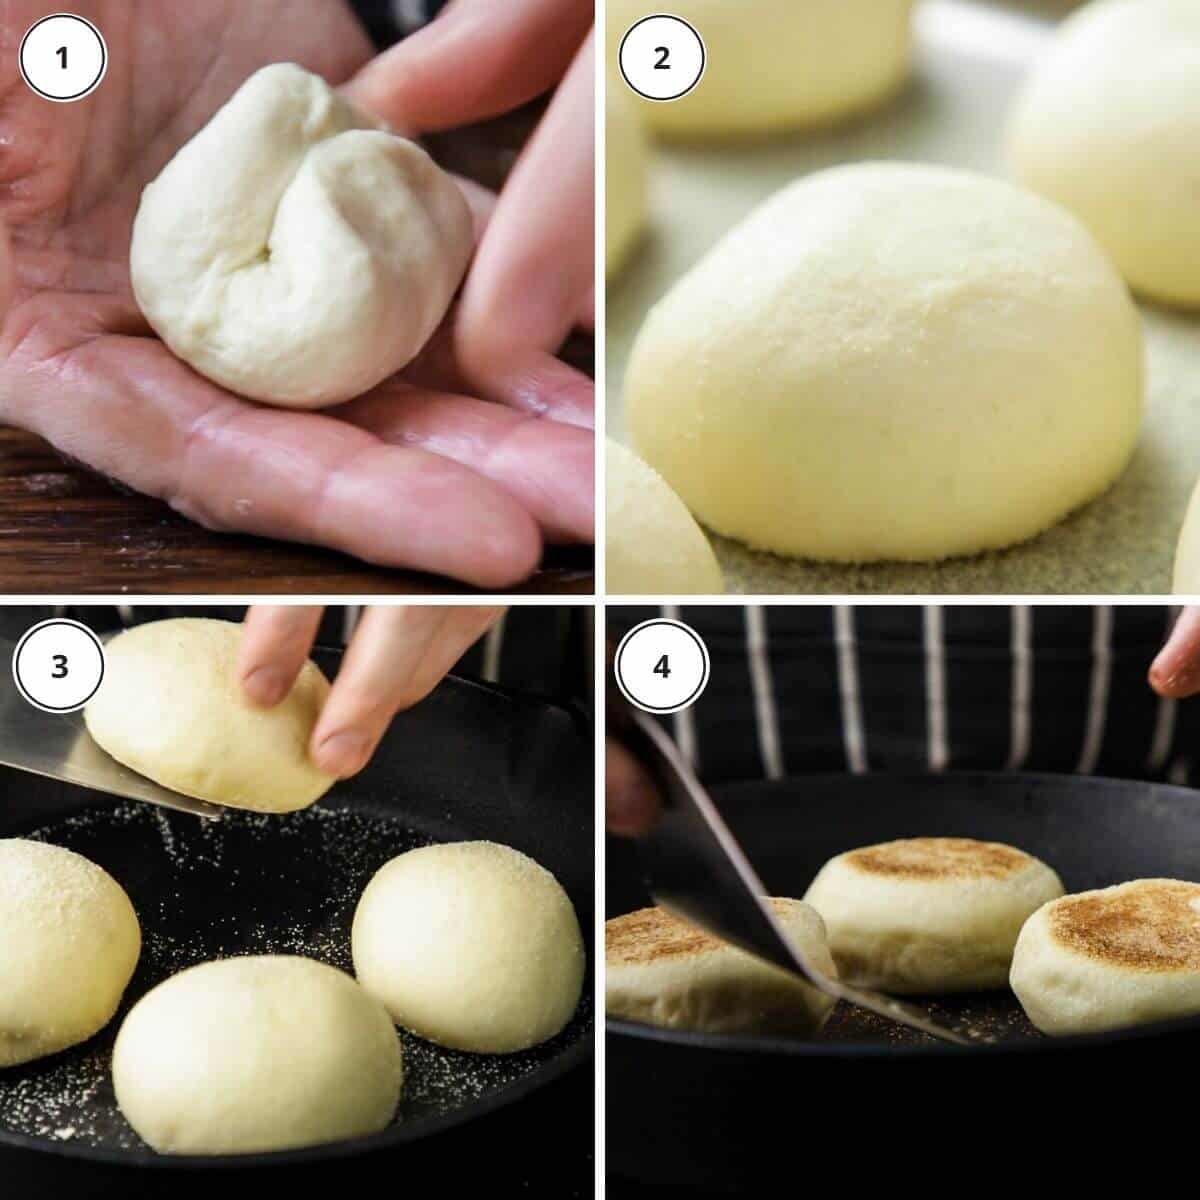 Picture steps for making English muffins.